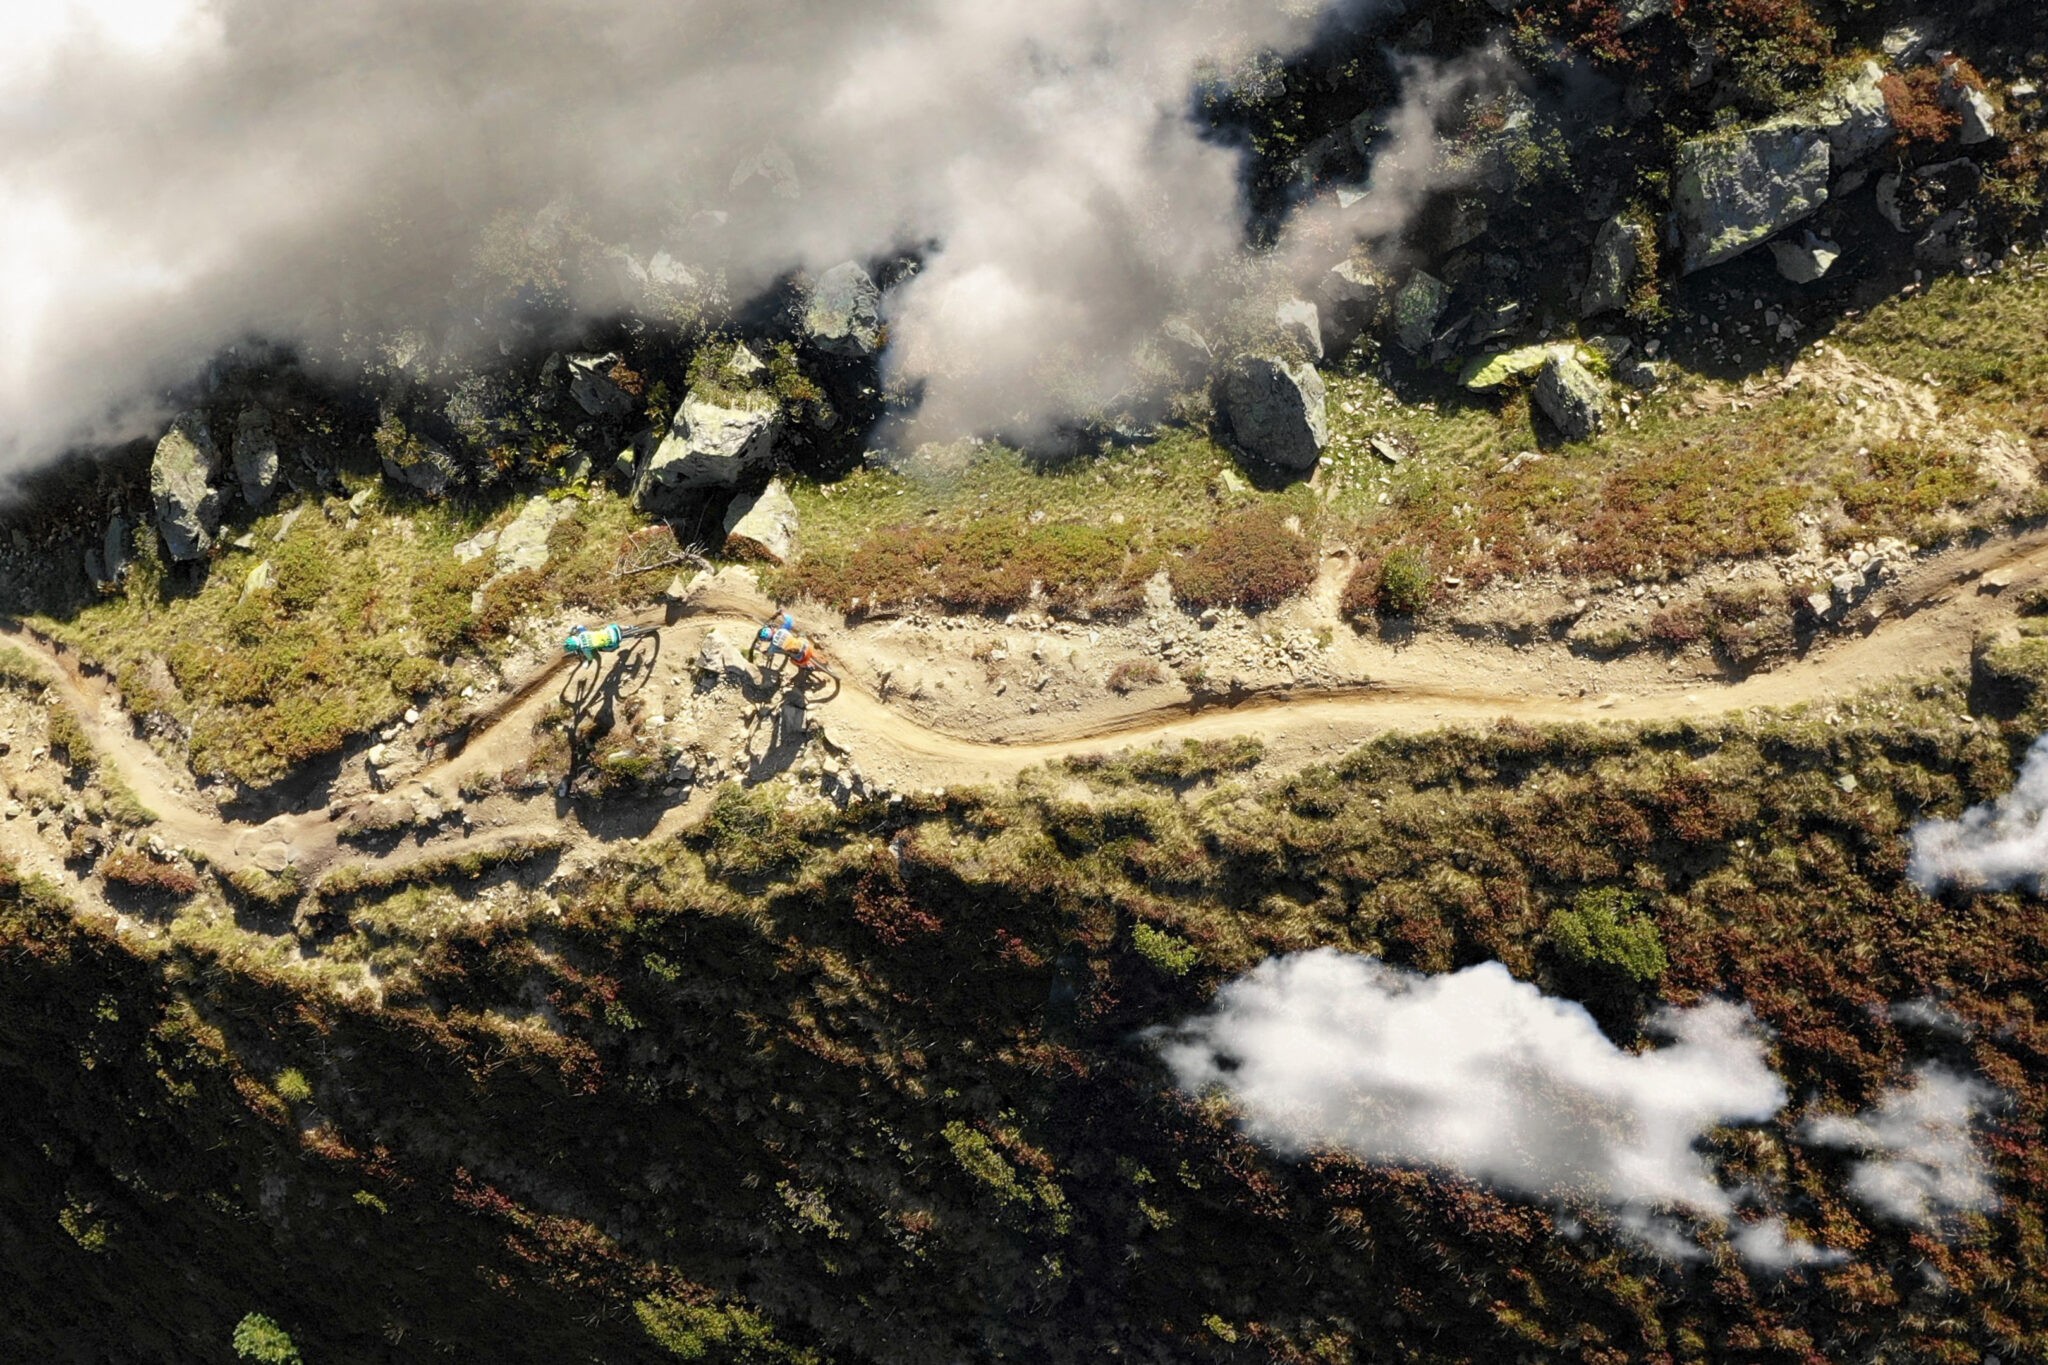 image shows mountain bikers riding a trail from a birds eye perspective